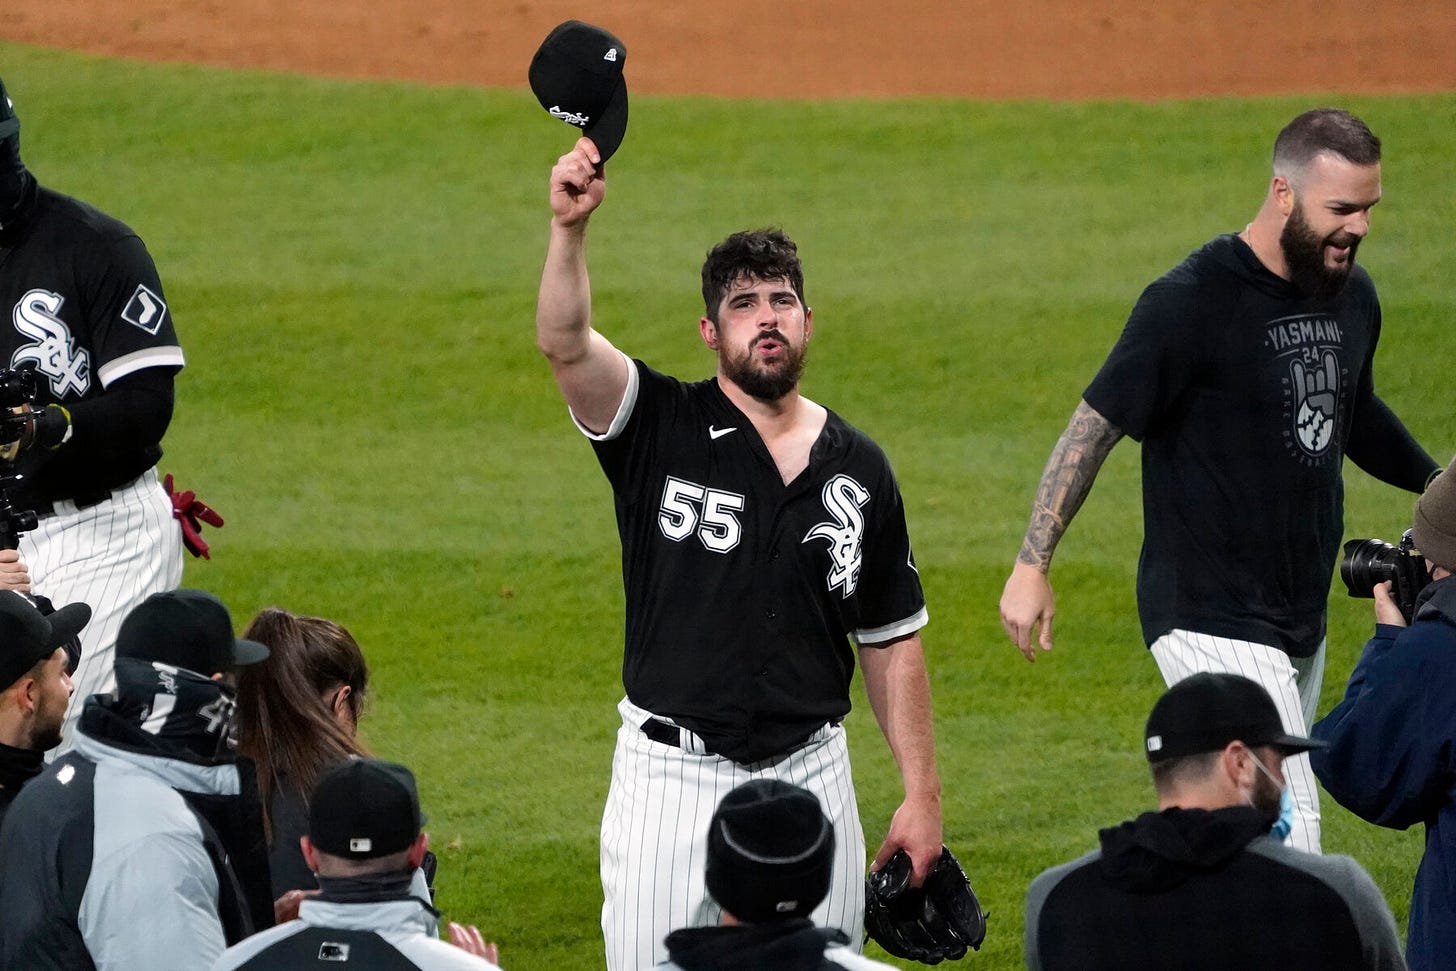 Carlos Rodon Loses Perfect Game in 9th, Gets No-Hitter - The New York Times